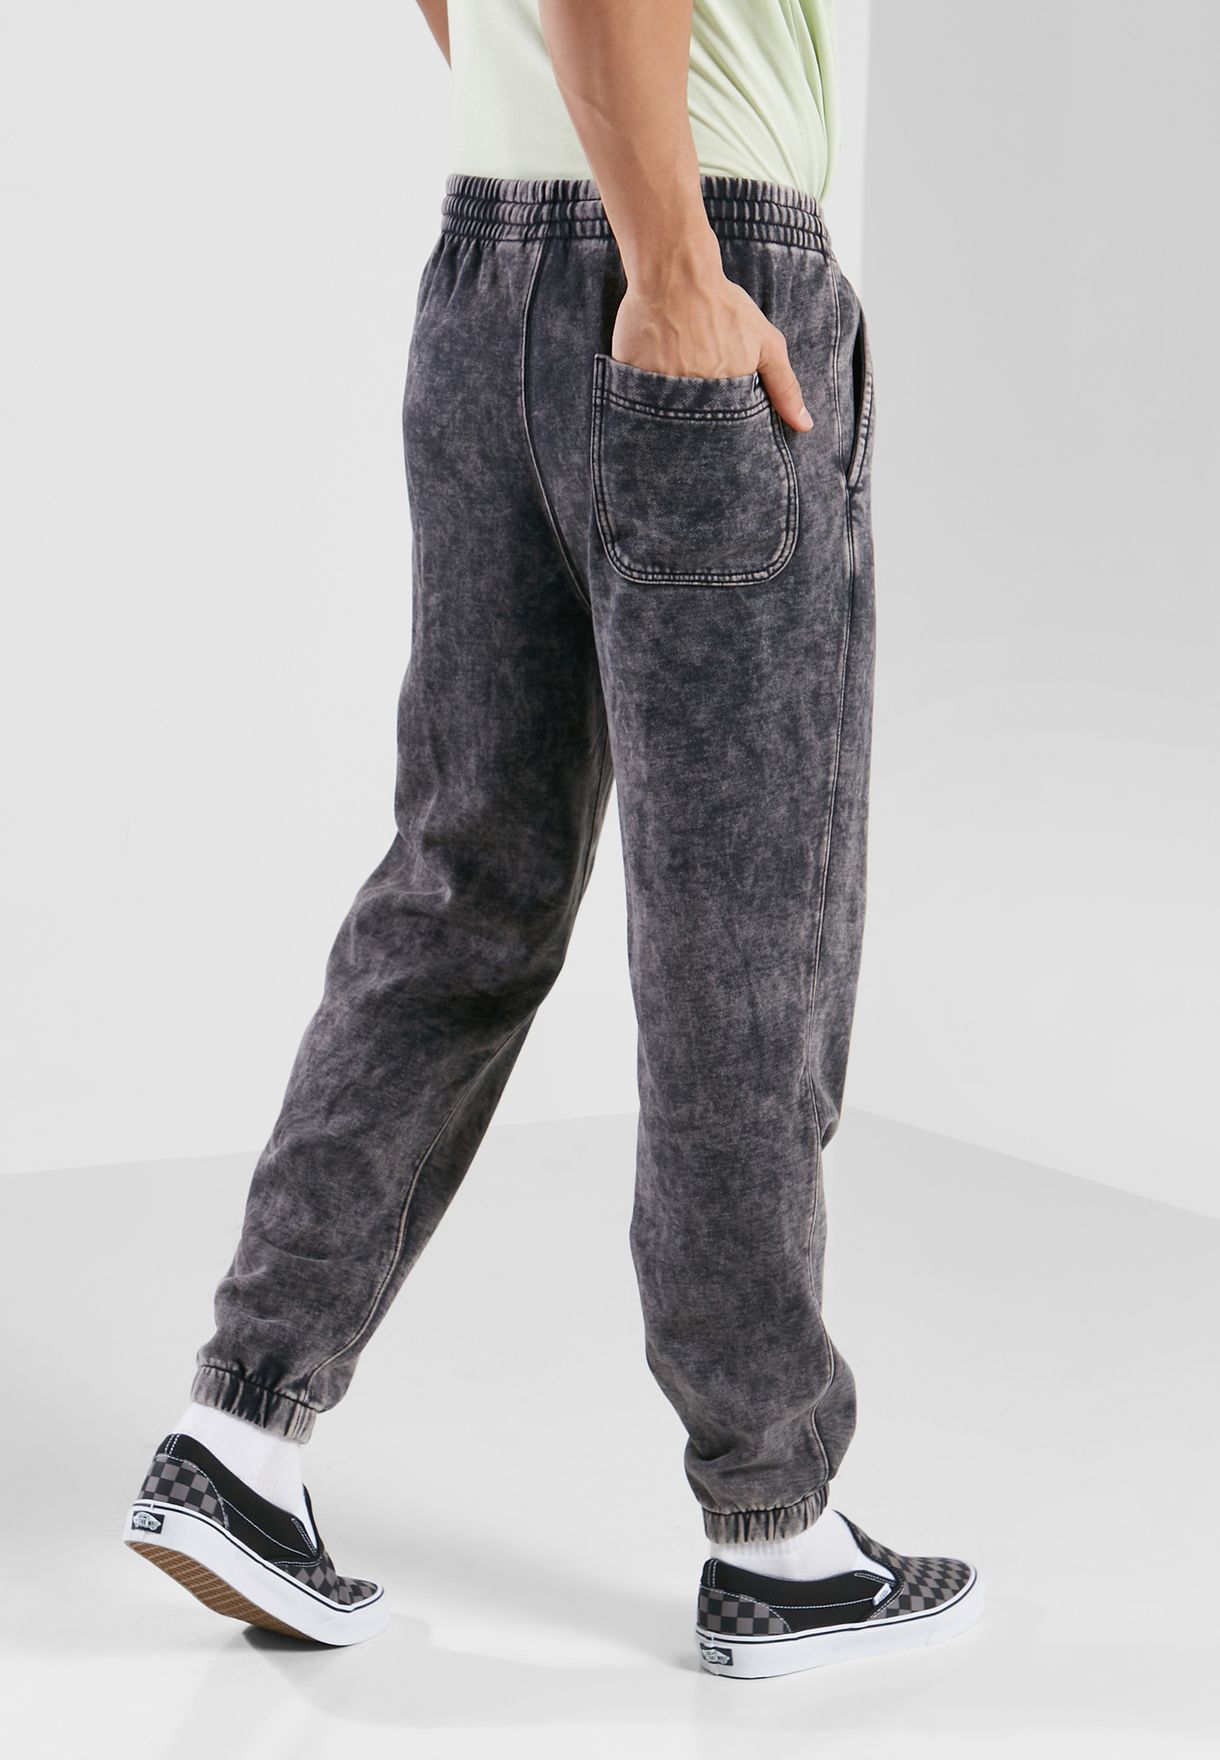 Mineral Relaxed Fleece Sweatpants